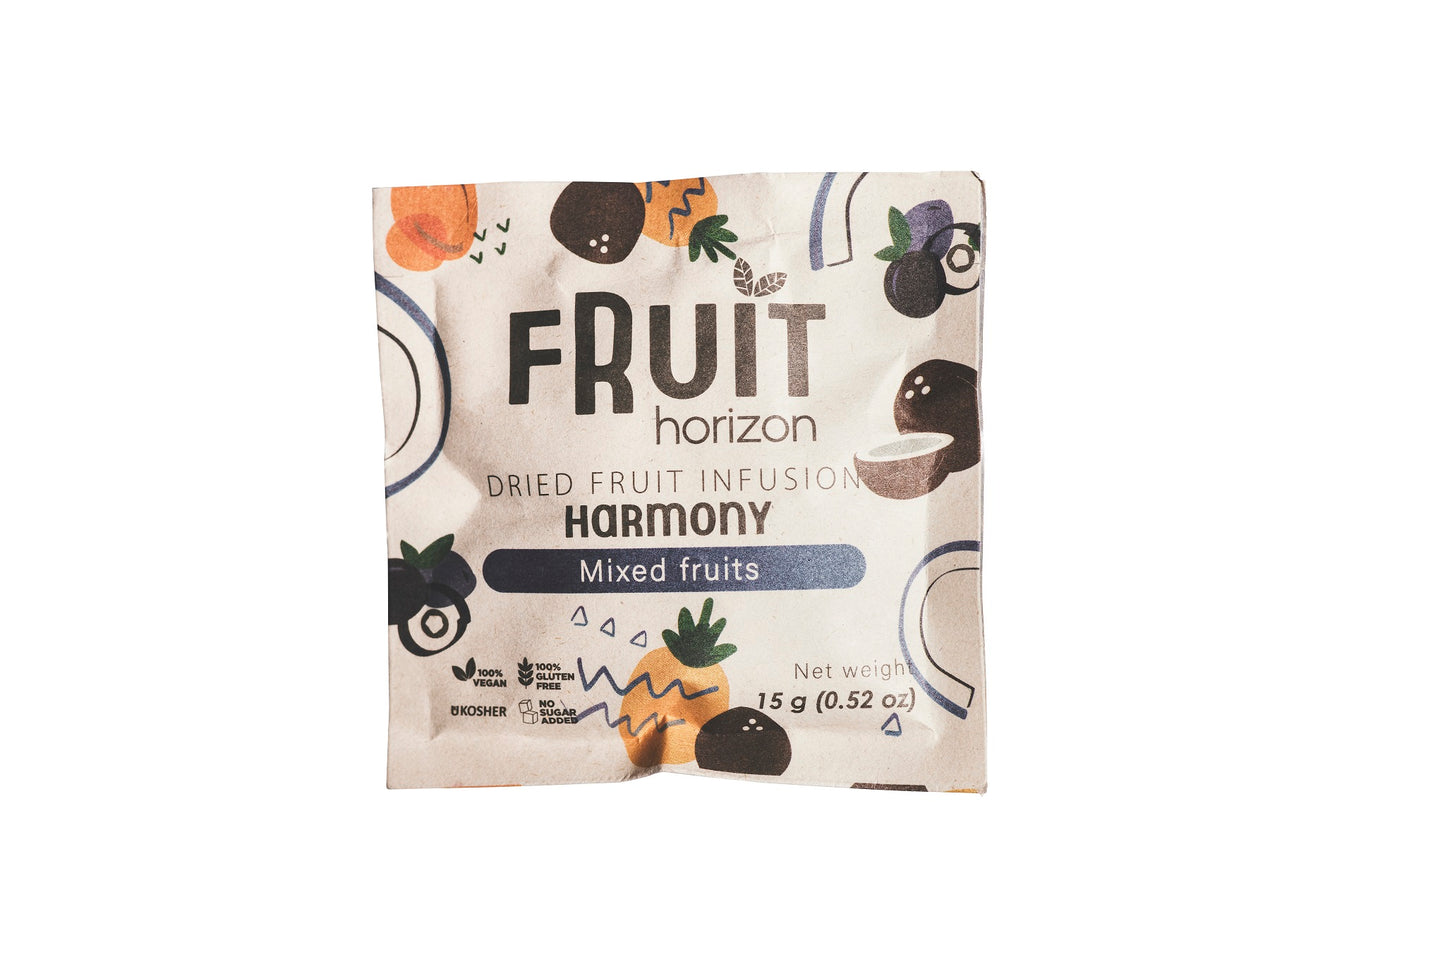 Fruit Horizon Fruit Infusion "Harmony" 24 pieces (refill pack for gift box)